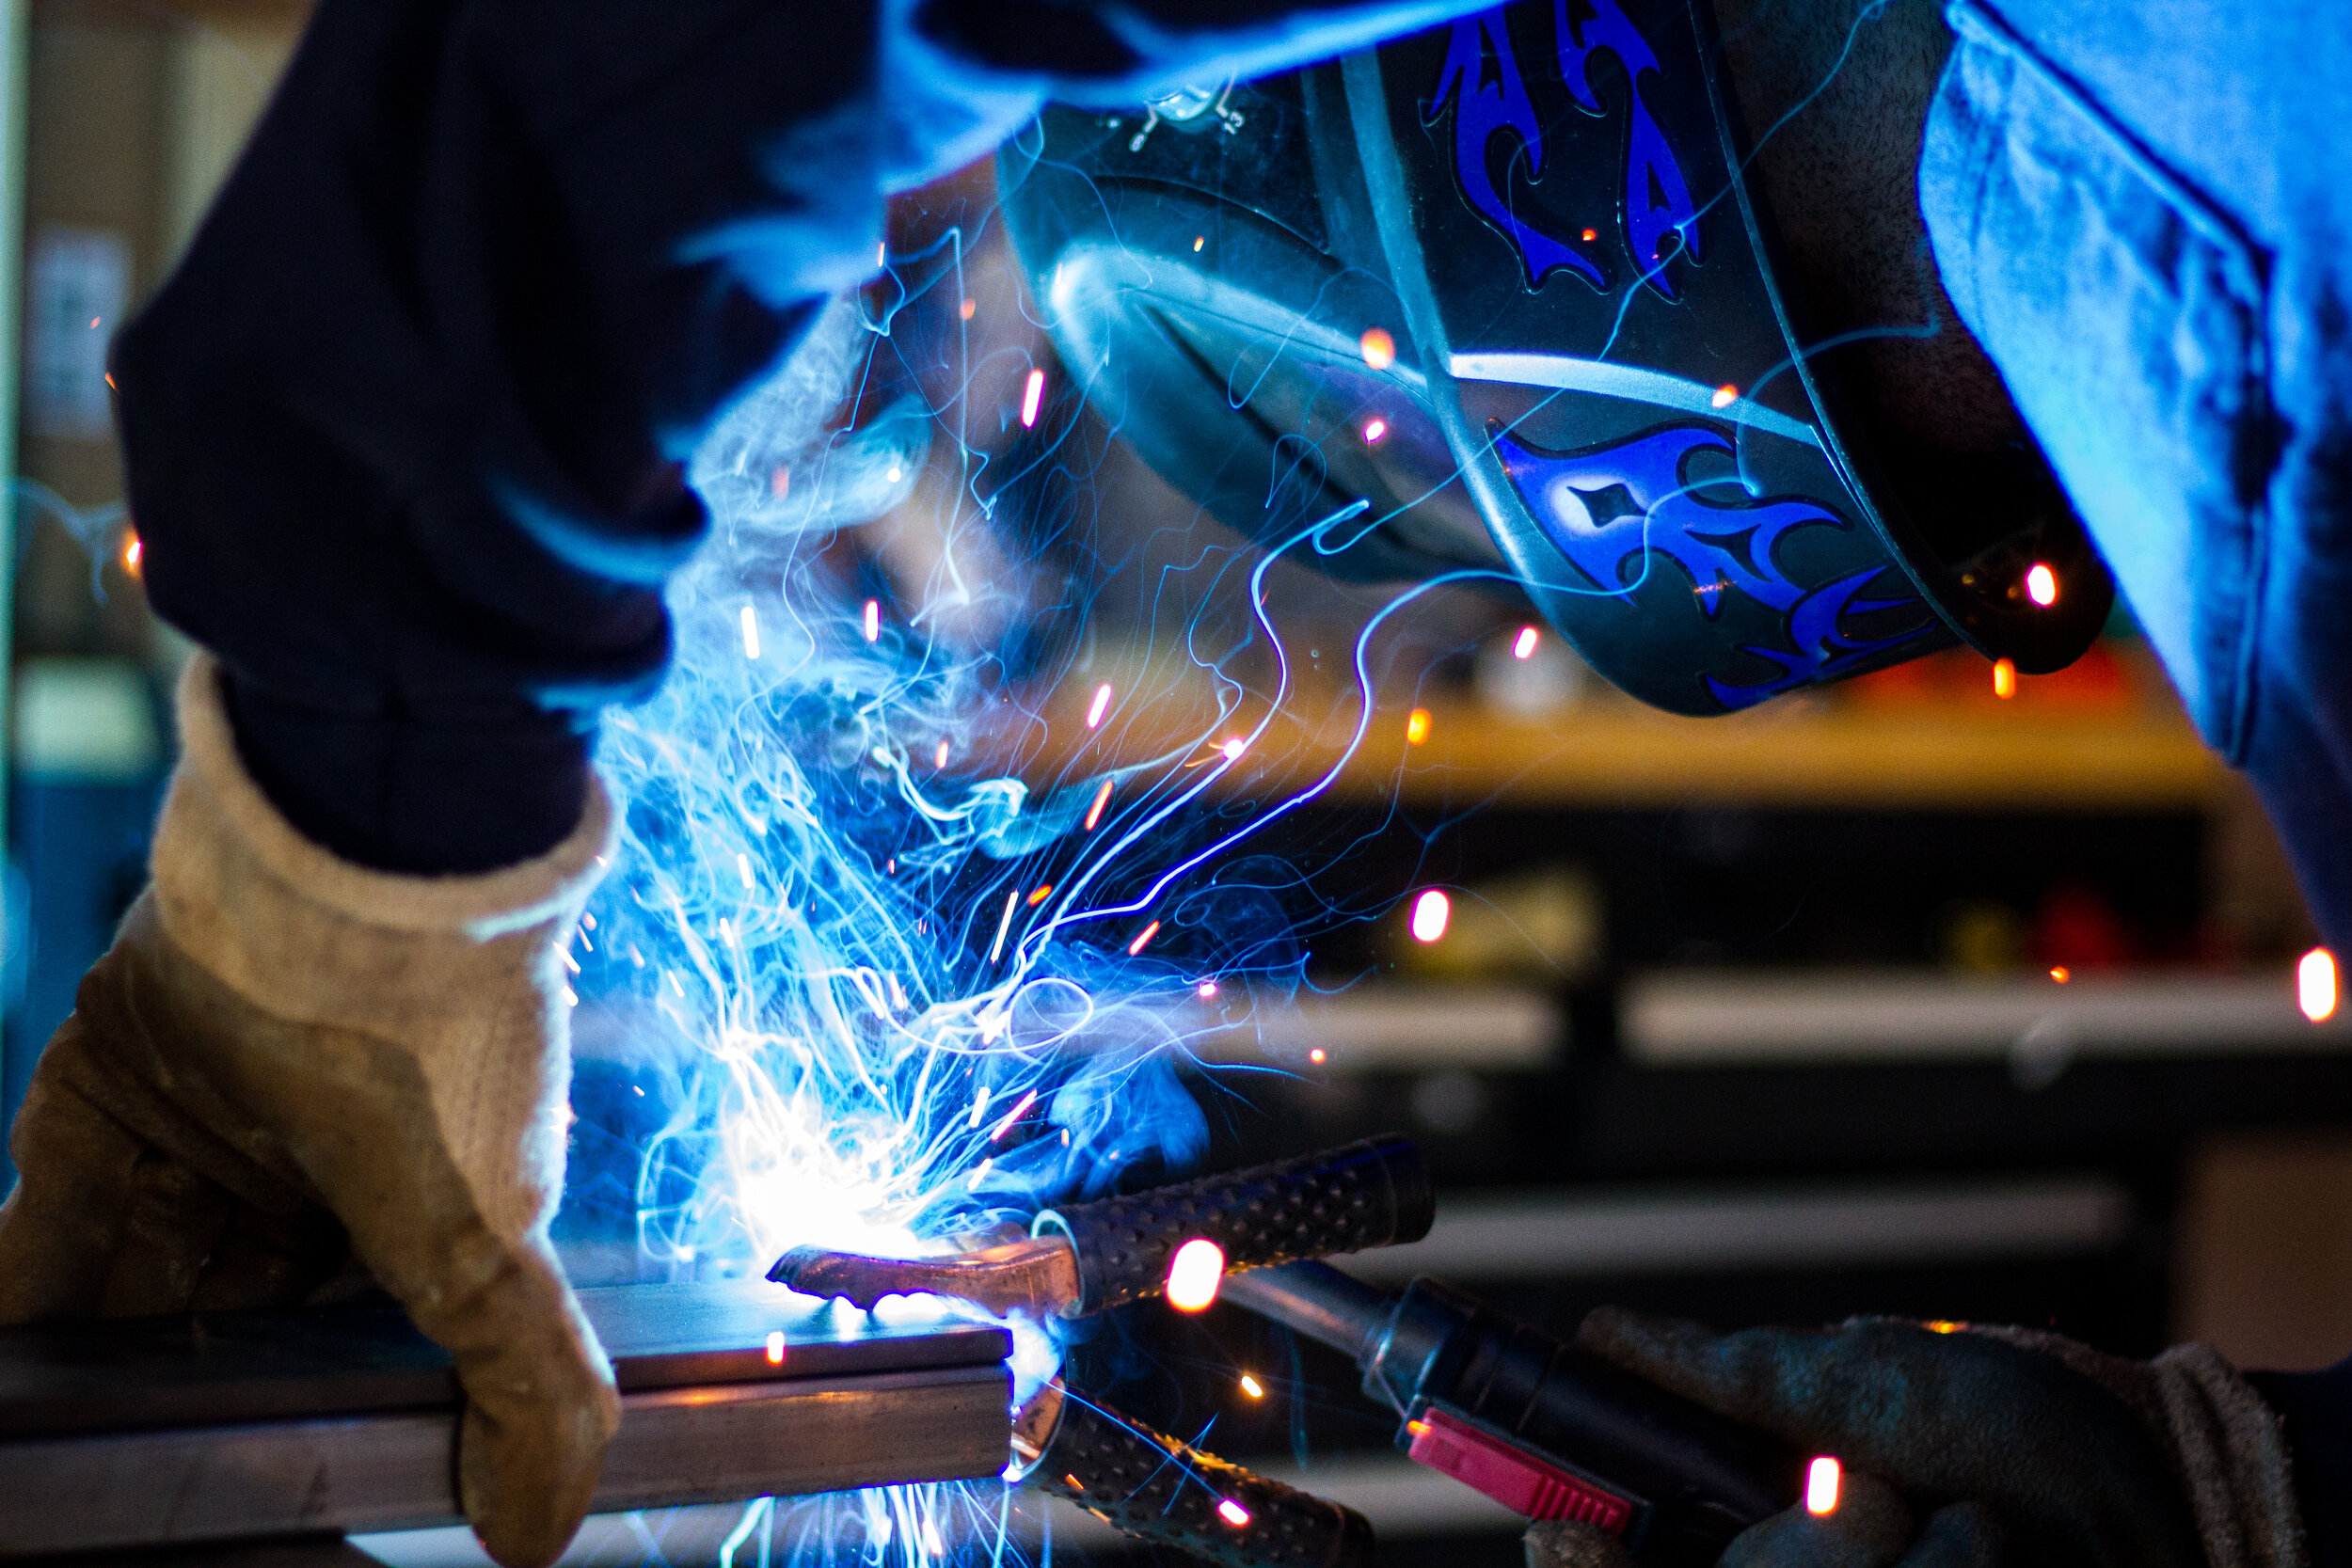 Person welding with a safety helmet. Blue sparks are flying up from the welding site